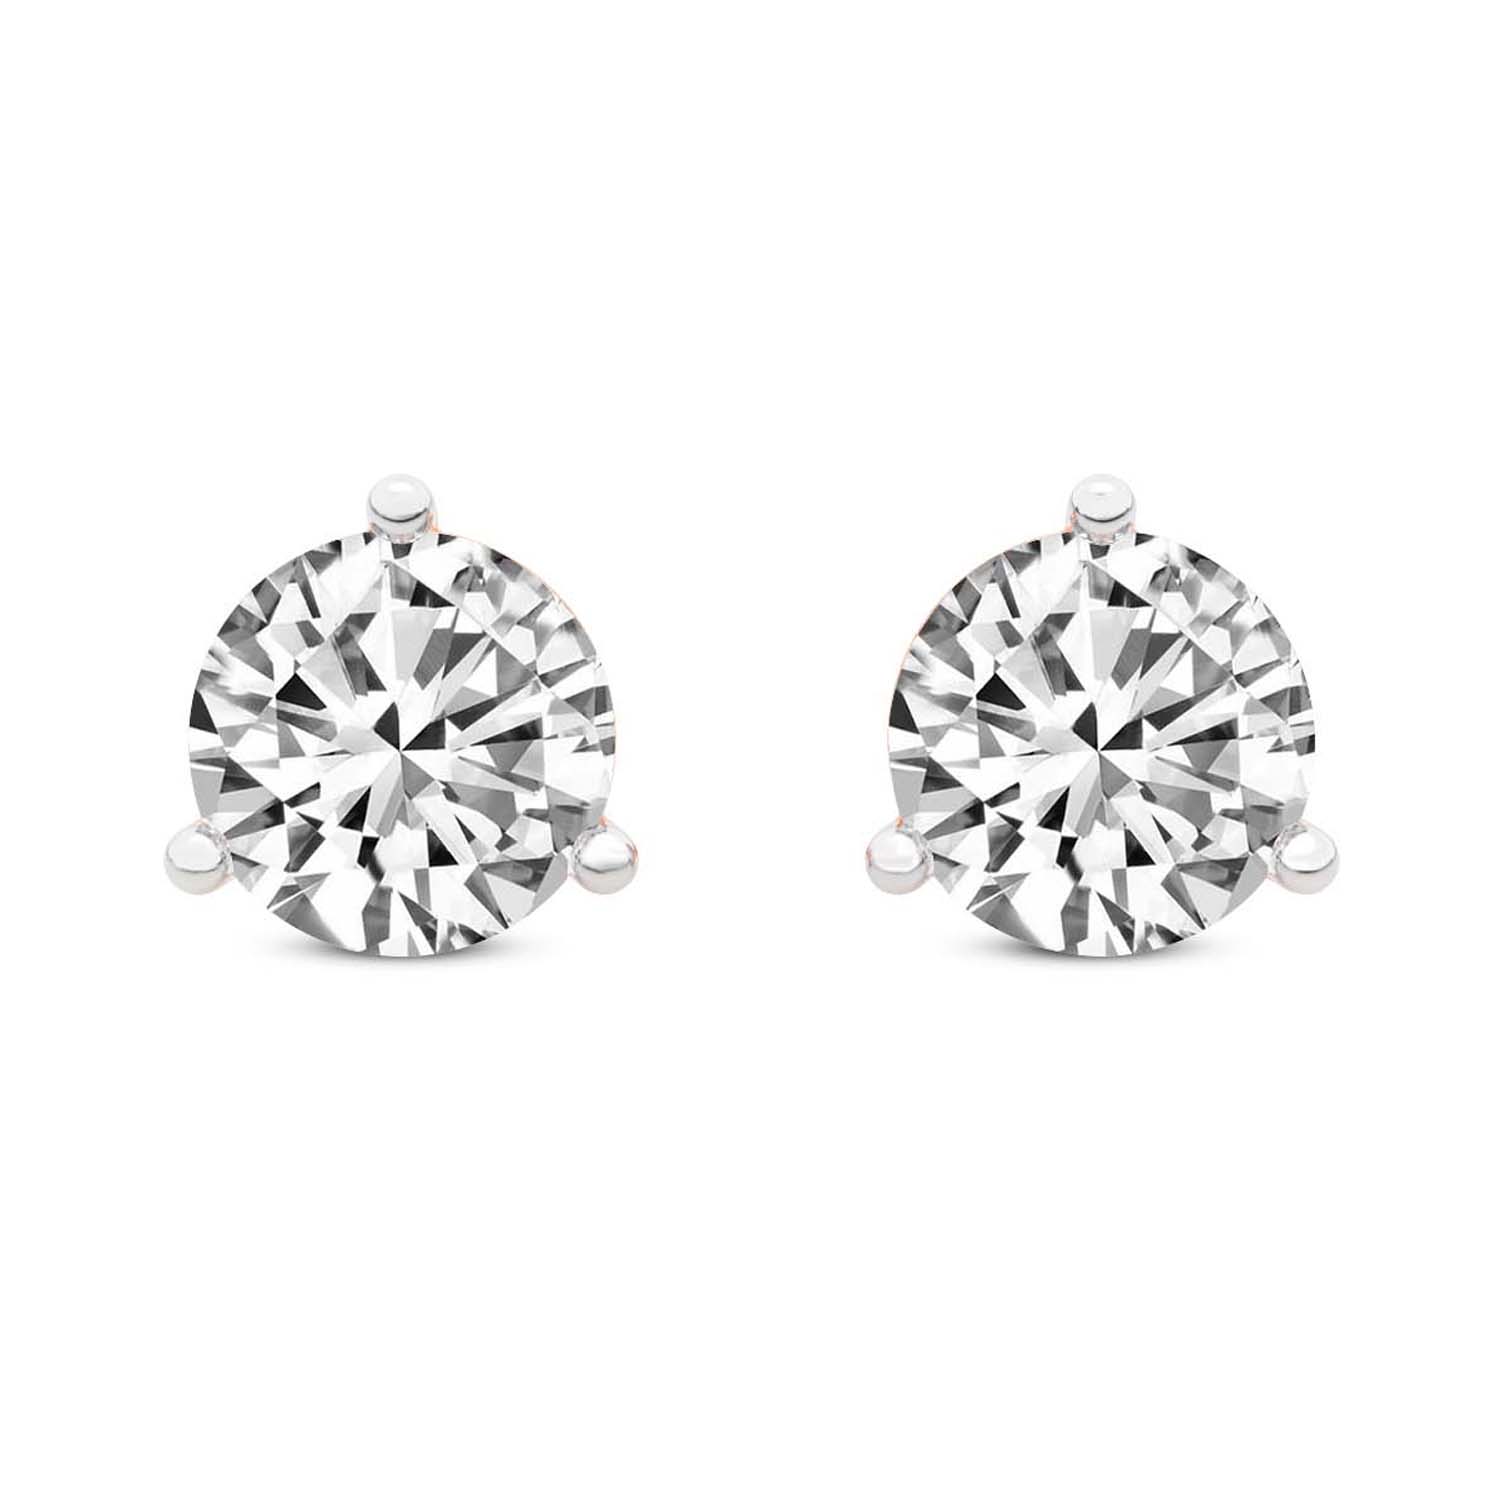 3 Prong Martini Round Lab Diamond Stud Earrings rose gold earring, small front view